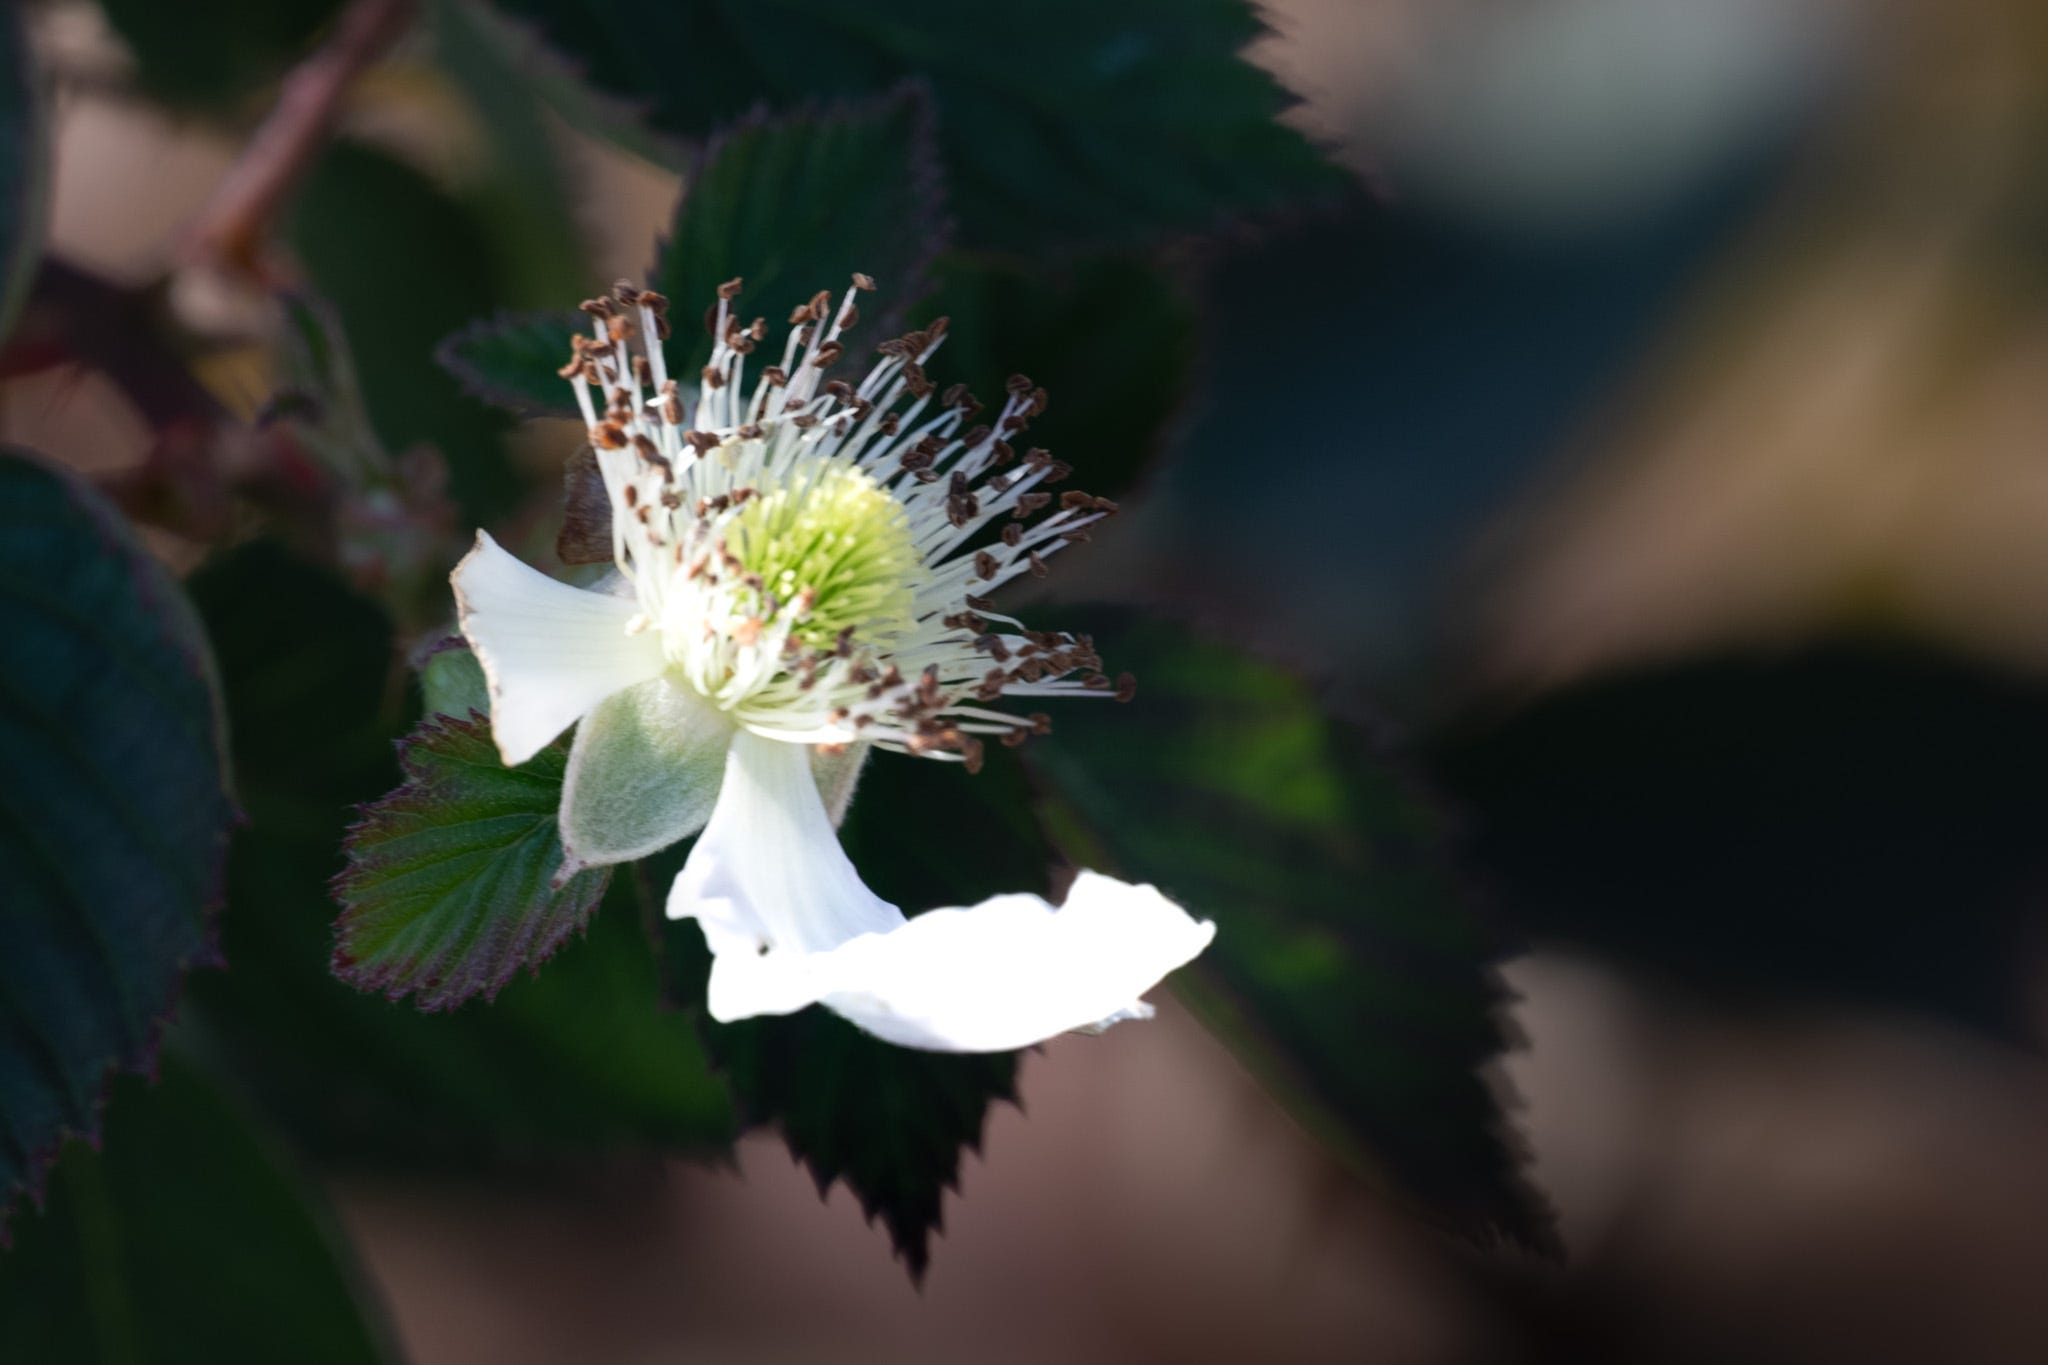 A single blackberry bloom: white petal, light yellow center and white spiky stamens with brown tips